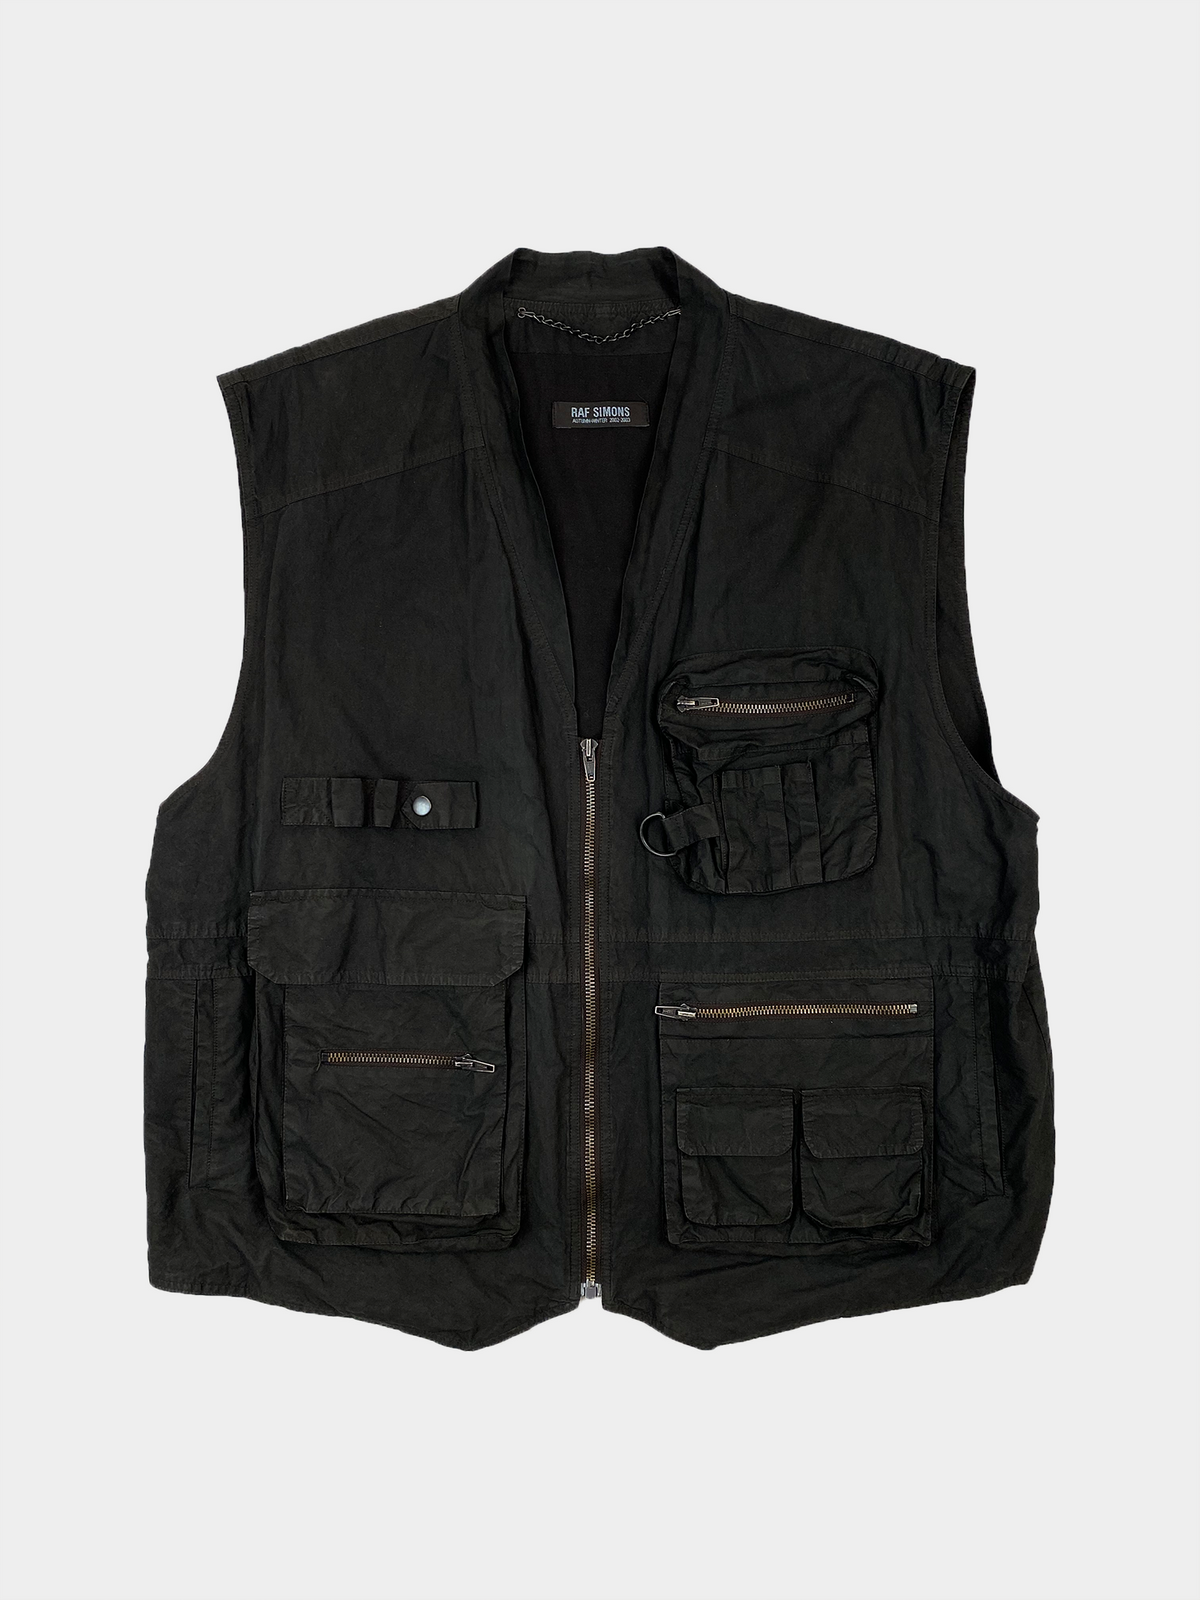 RAF SIMONS A/W02 Virginia Creeper Vest — ARCHIVED